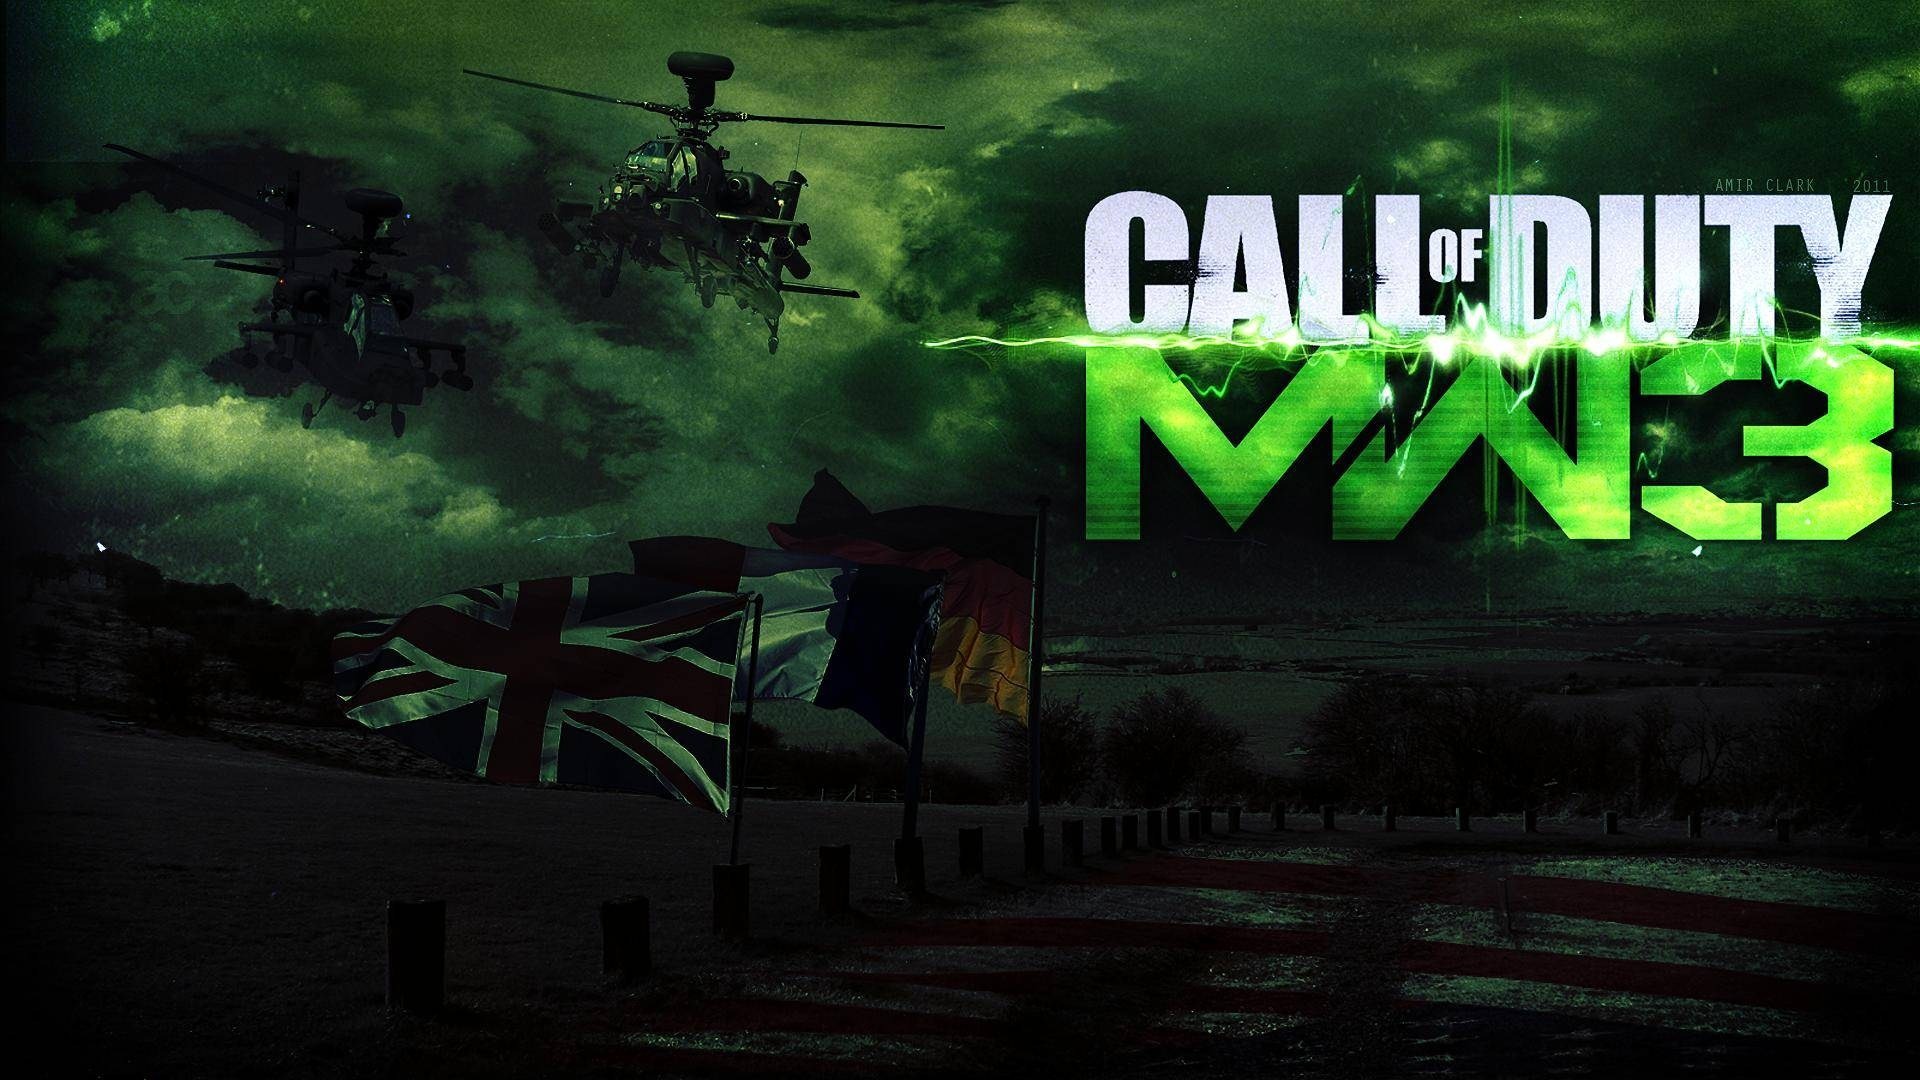 Call of Duty: MW3 HD wallpapers #3 - 1920x1080